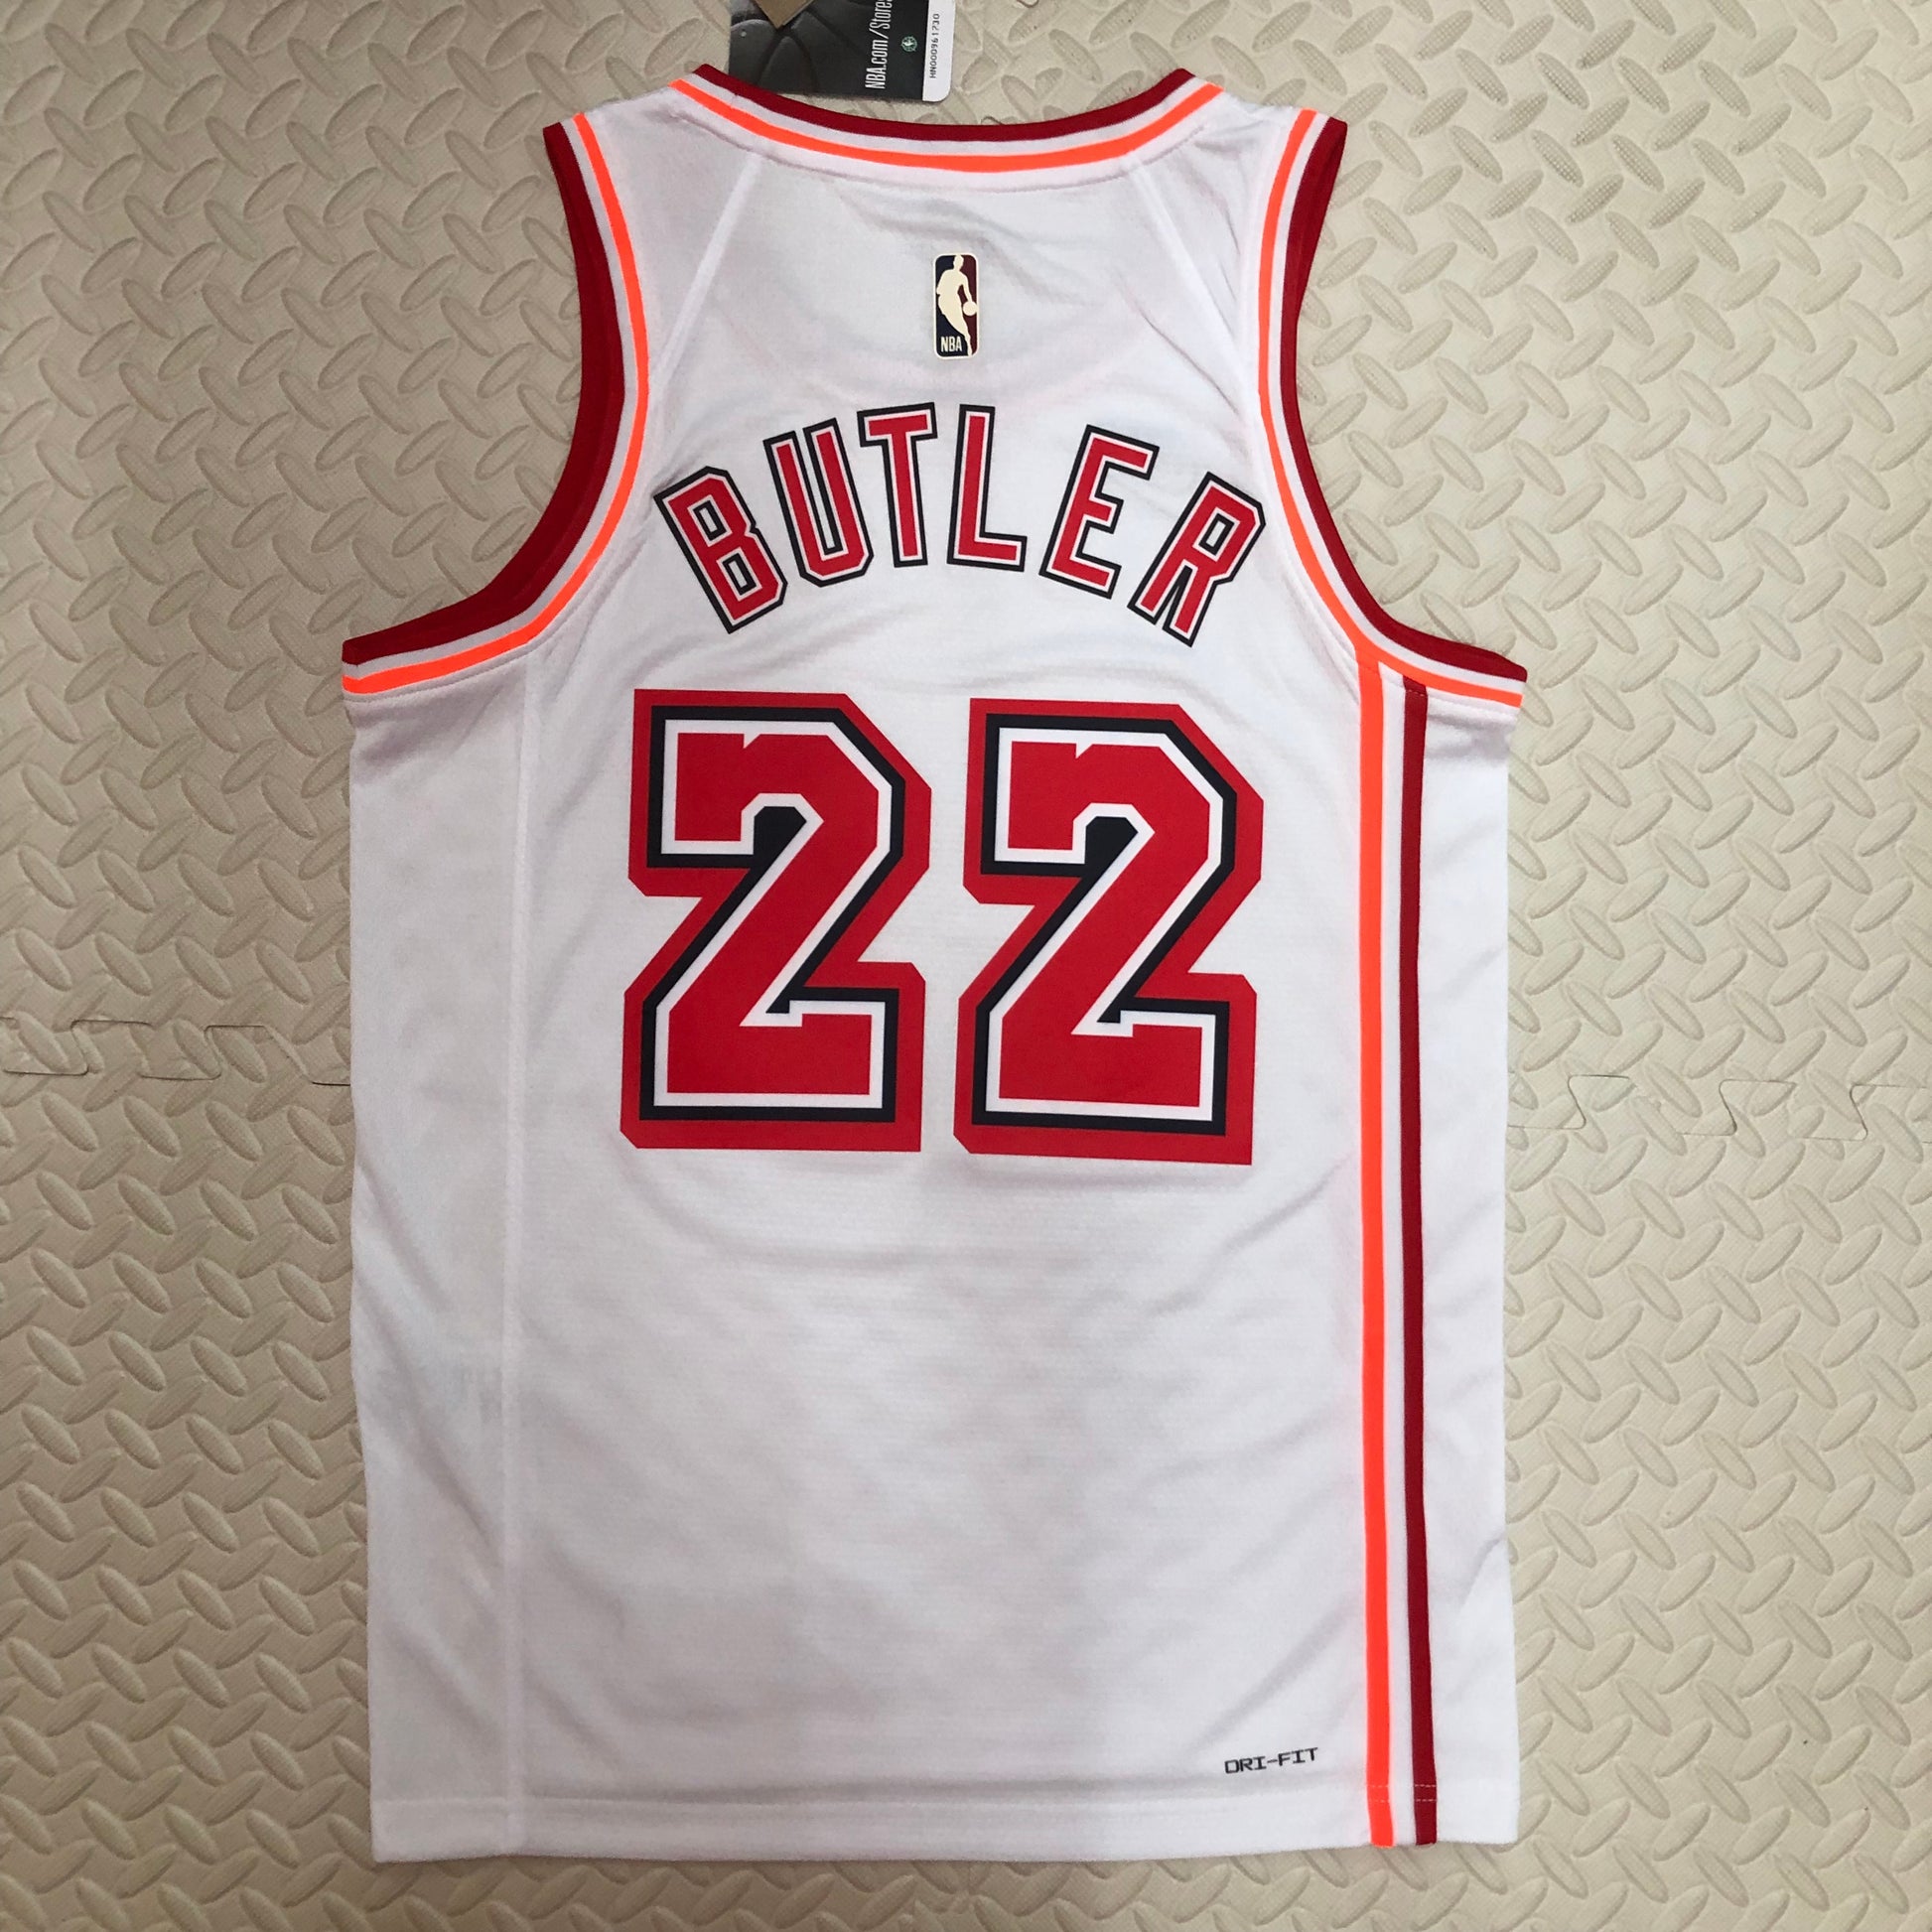 Jimmy Butler Miami Heat Black #22 Youth 8-20 Home Edition Swingman Player  Jersey